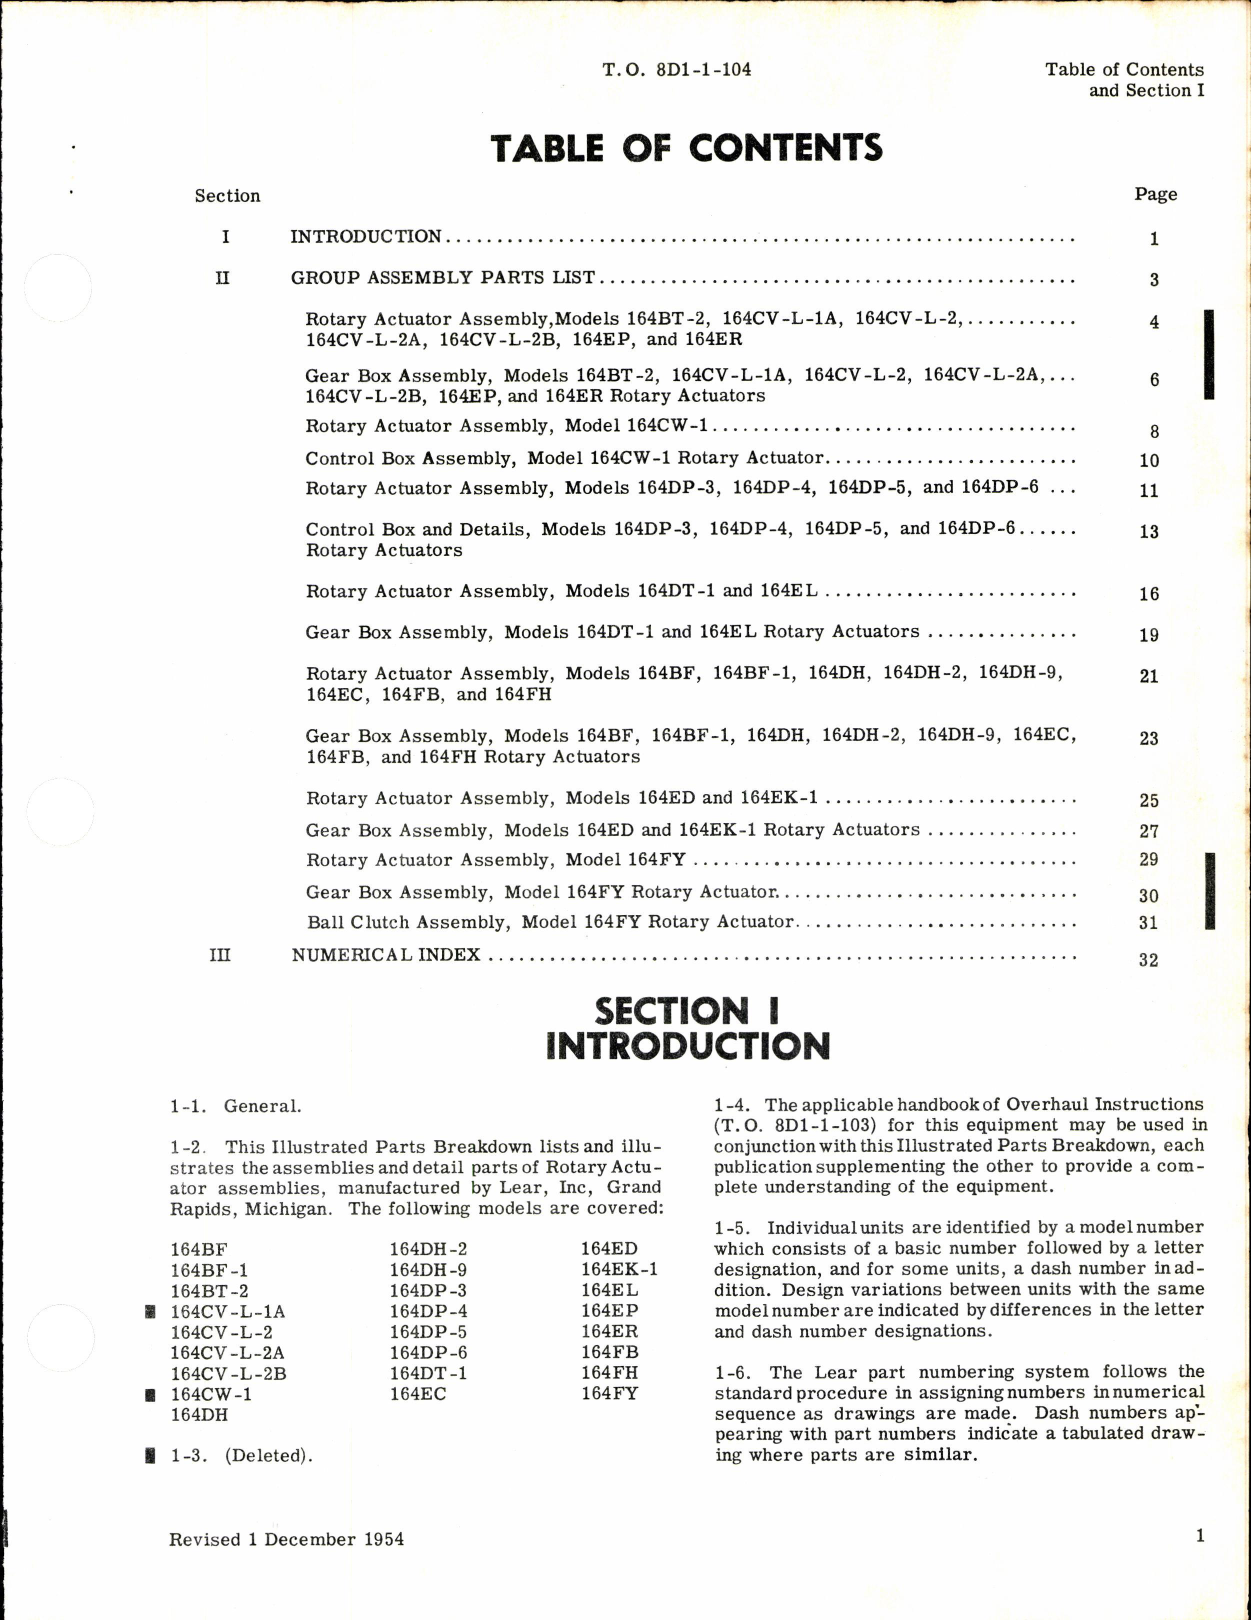 Sample page 3 from AirCorps Library document: Illustrated Parts Breakdown Rotary Actuator Assembly 164 Series